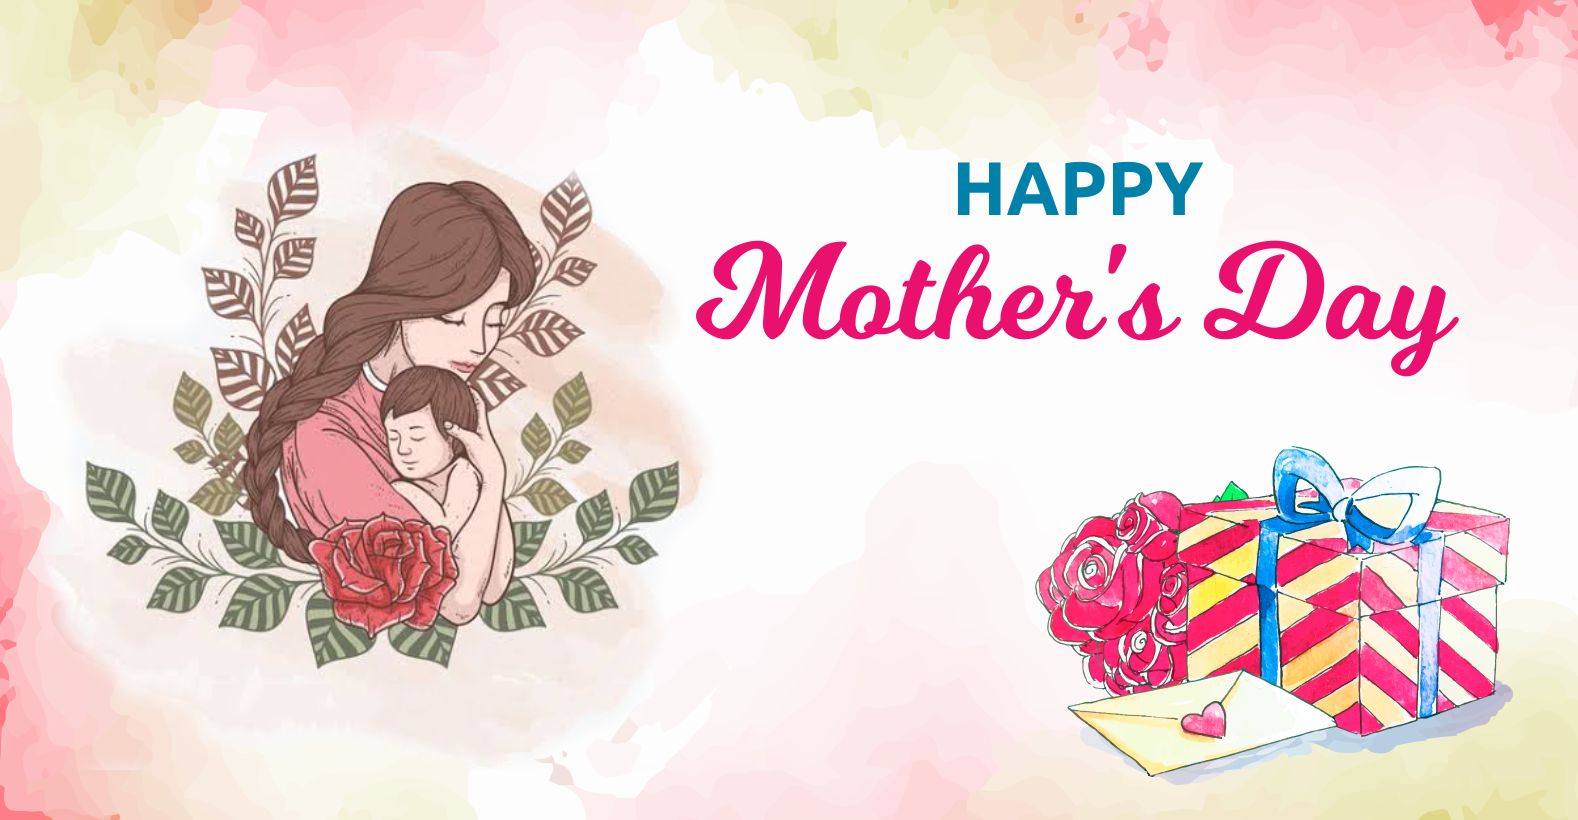 Make Her Feel Special- Its Mother’s Day